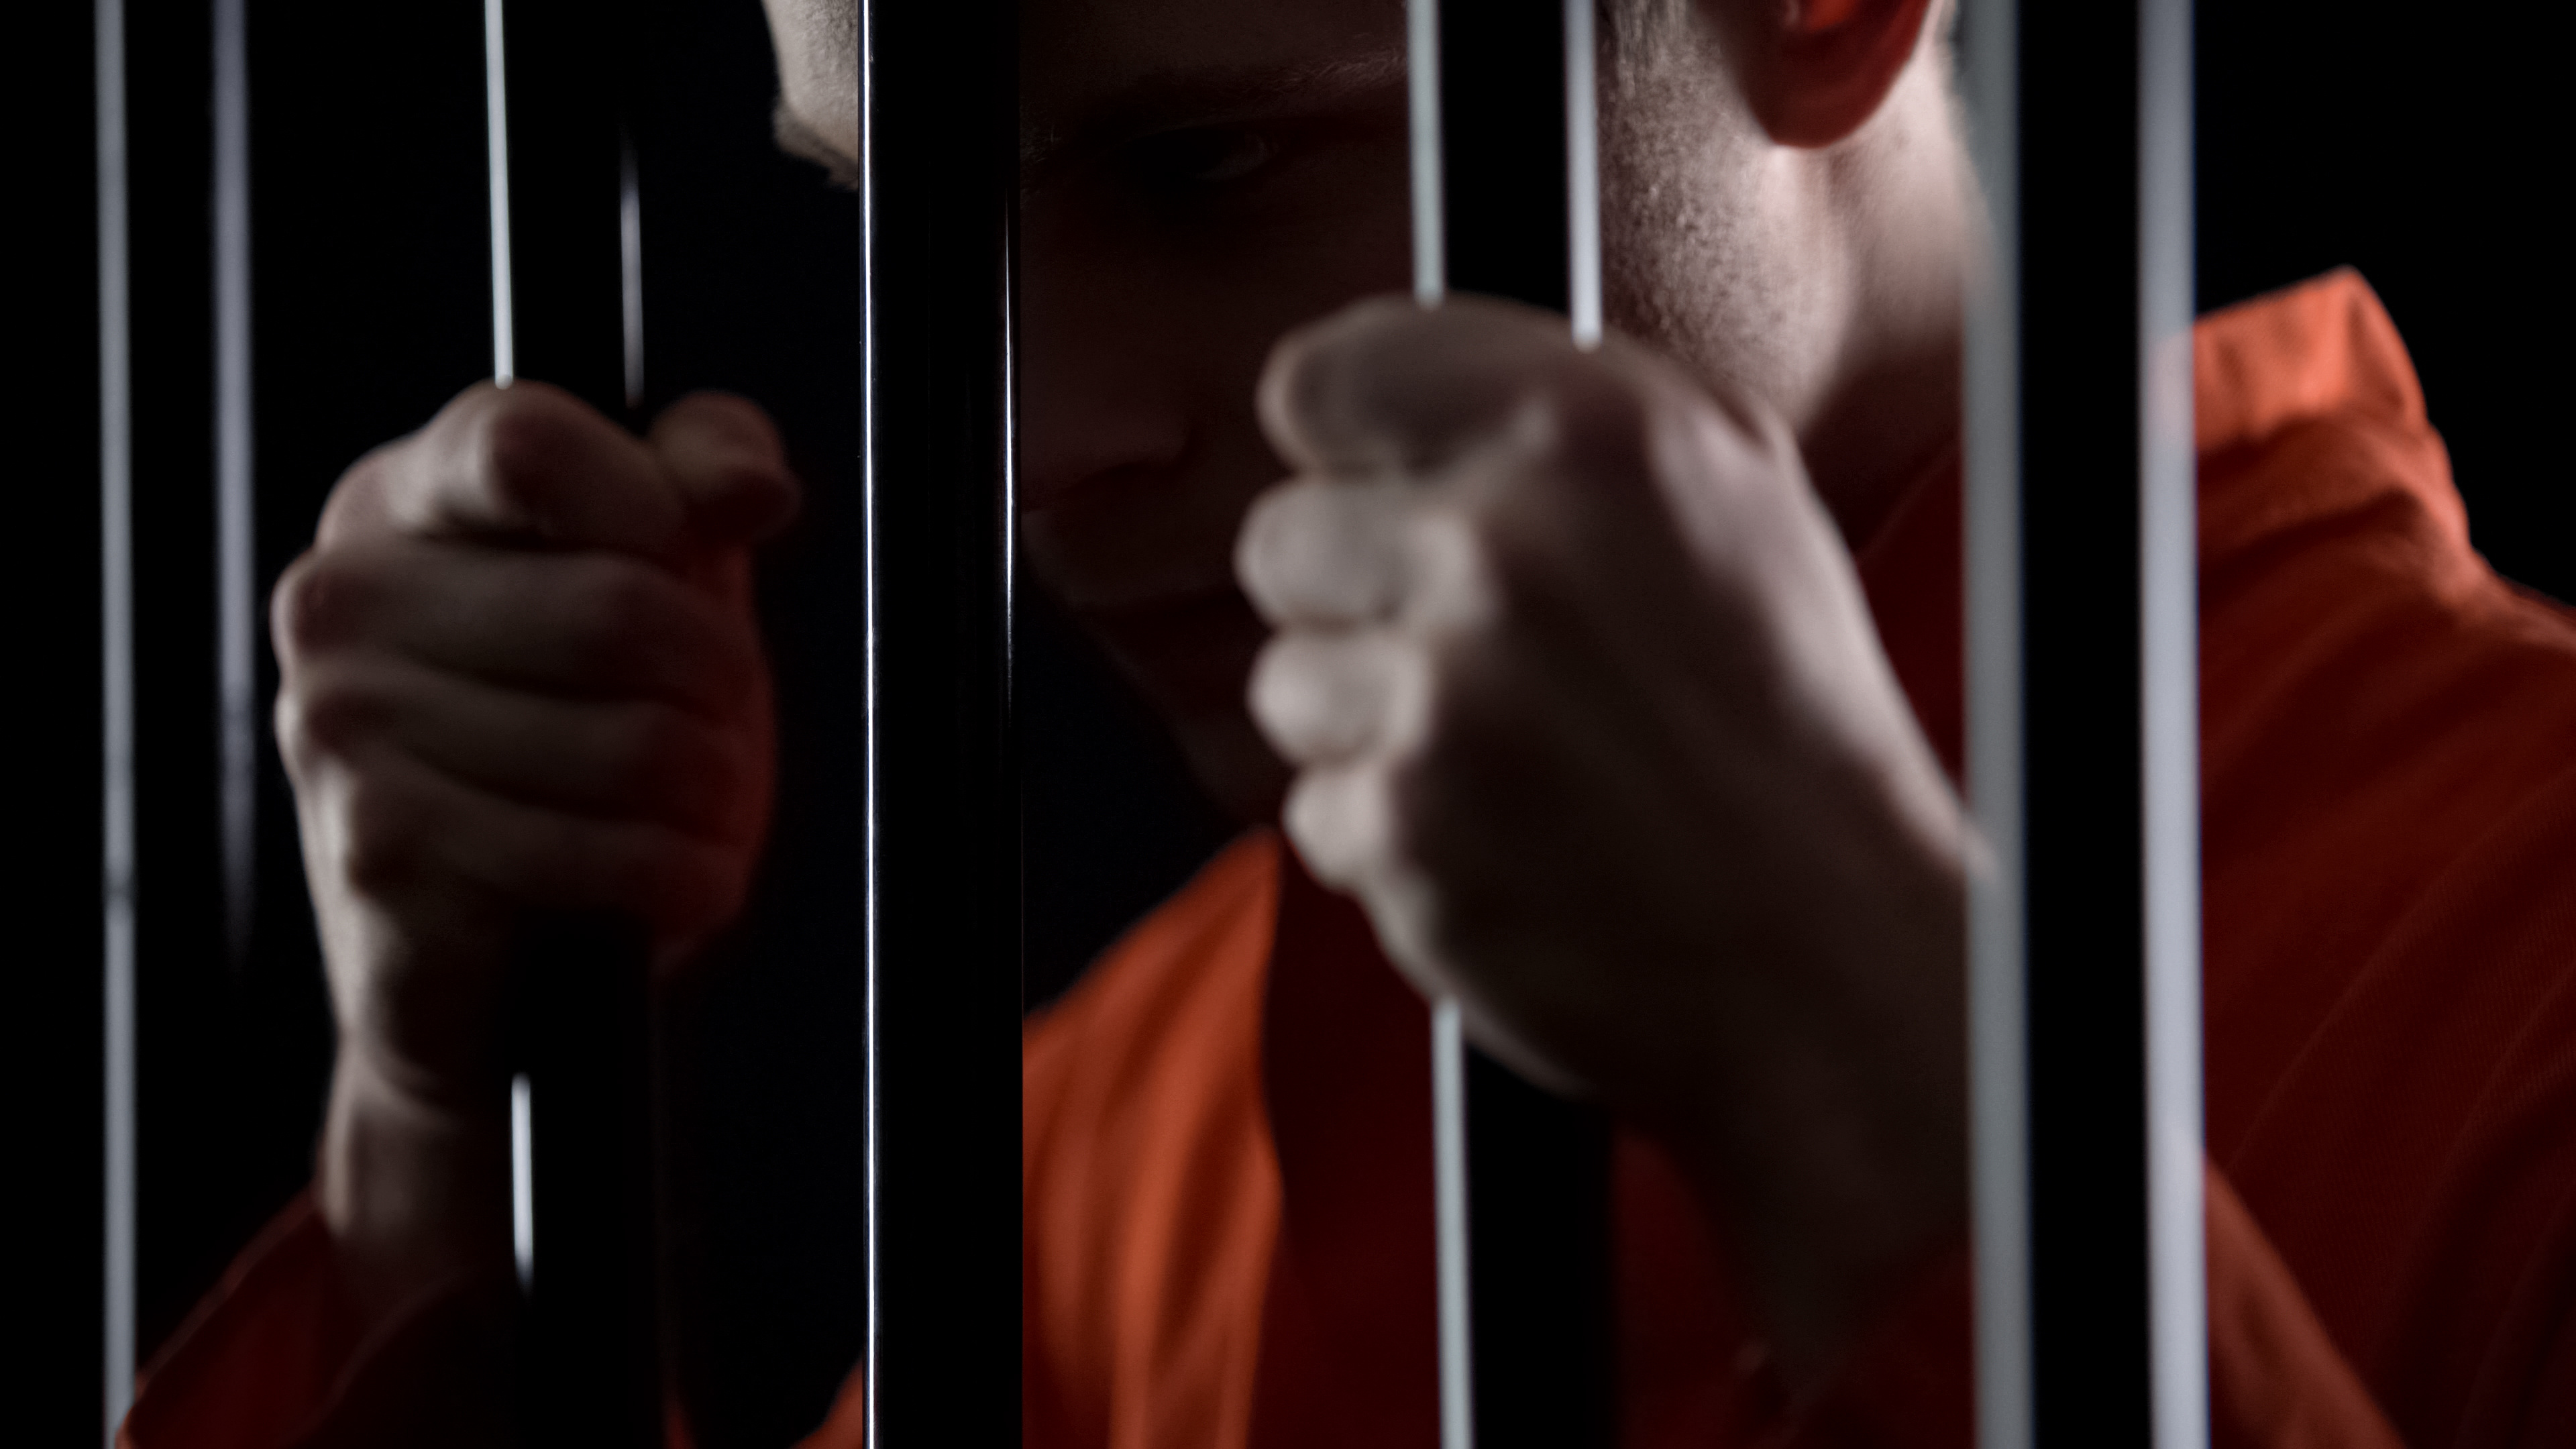 Man in jail behind cell bars - Chicago Criminal Defense Attorney